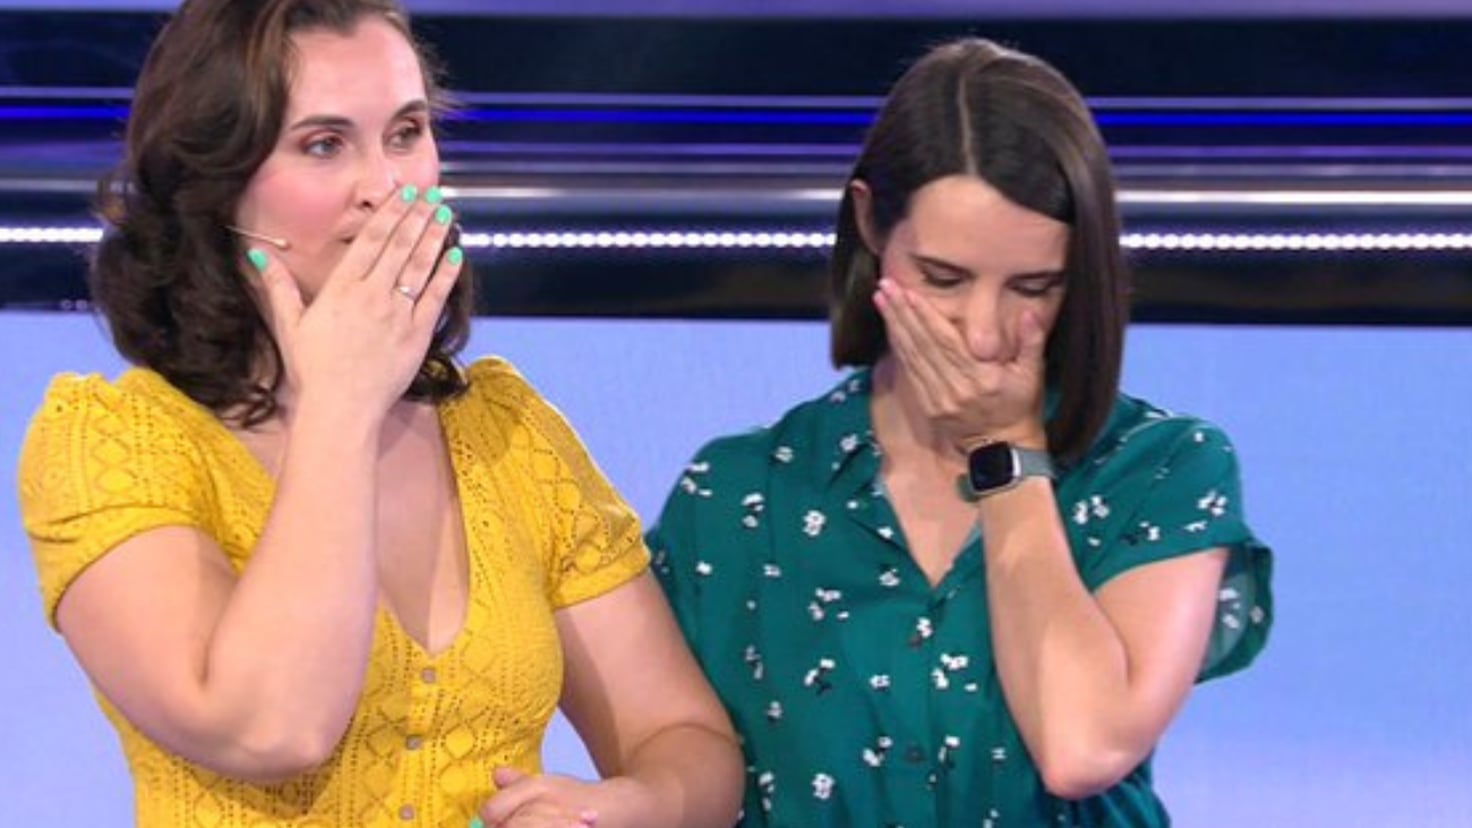 Two Catch a Million contestants lose all their money on the first question: What have we done?
